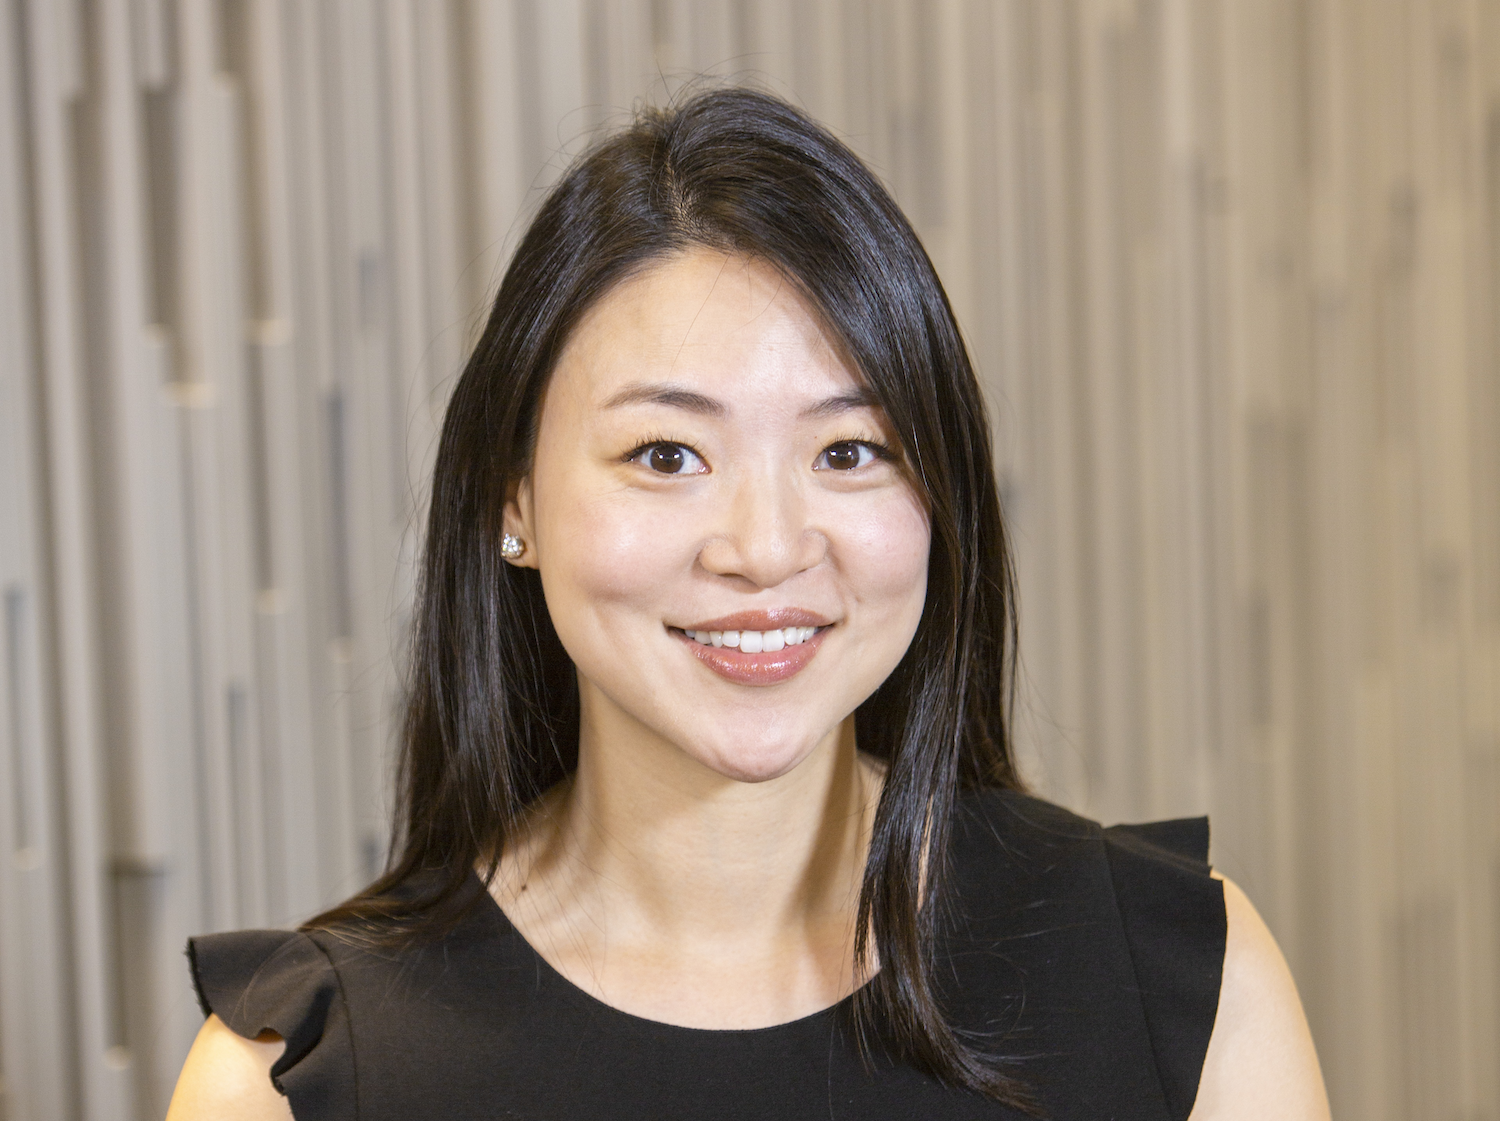 Four CIM Non-Traded REITs Appoint Elaine Wong as Director